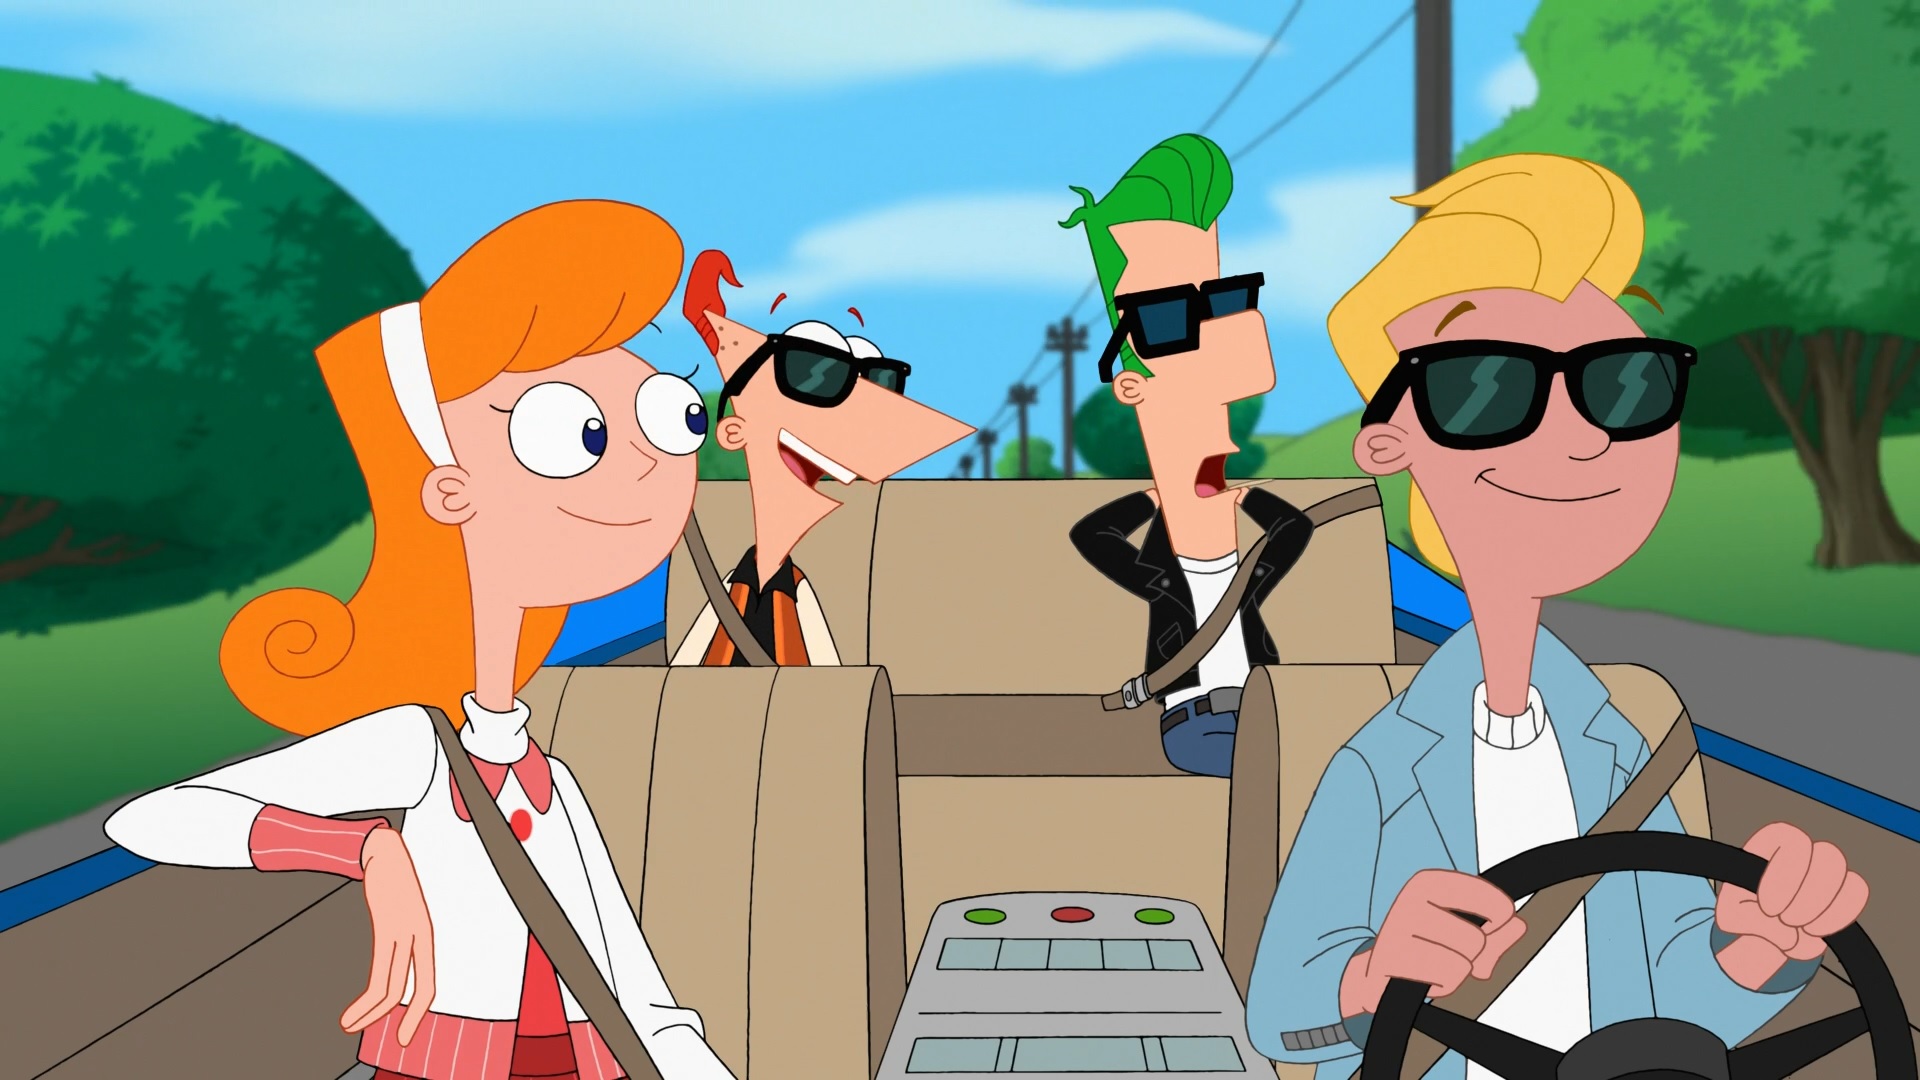 phineas and ferb owca files download torrent